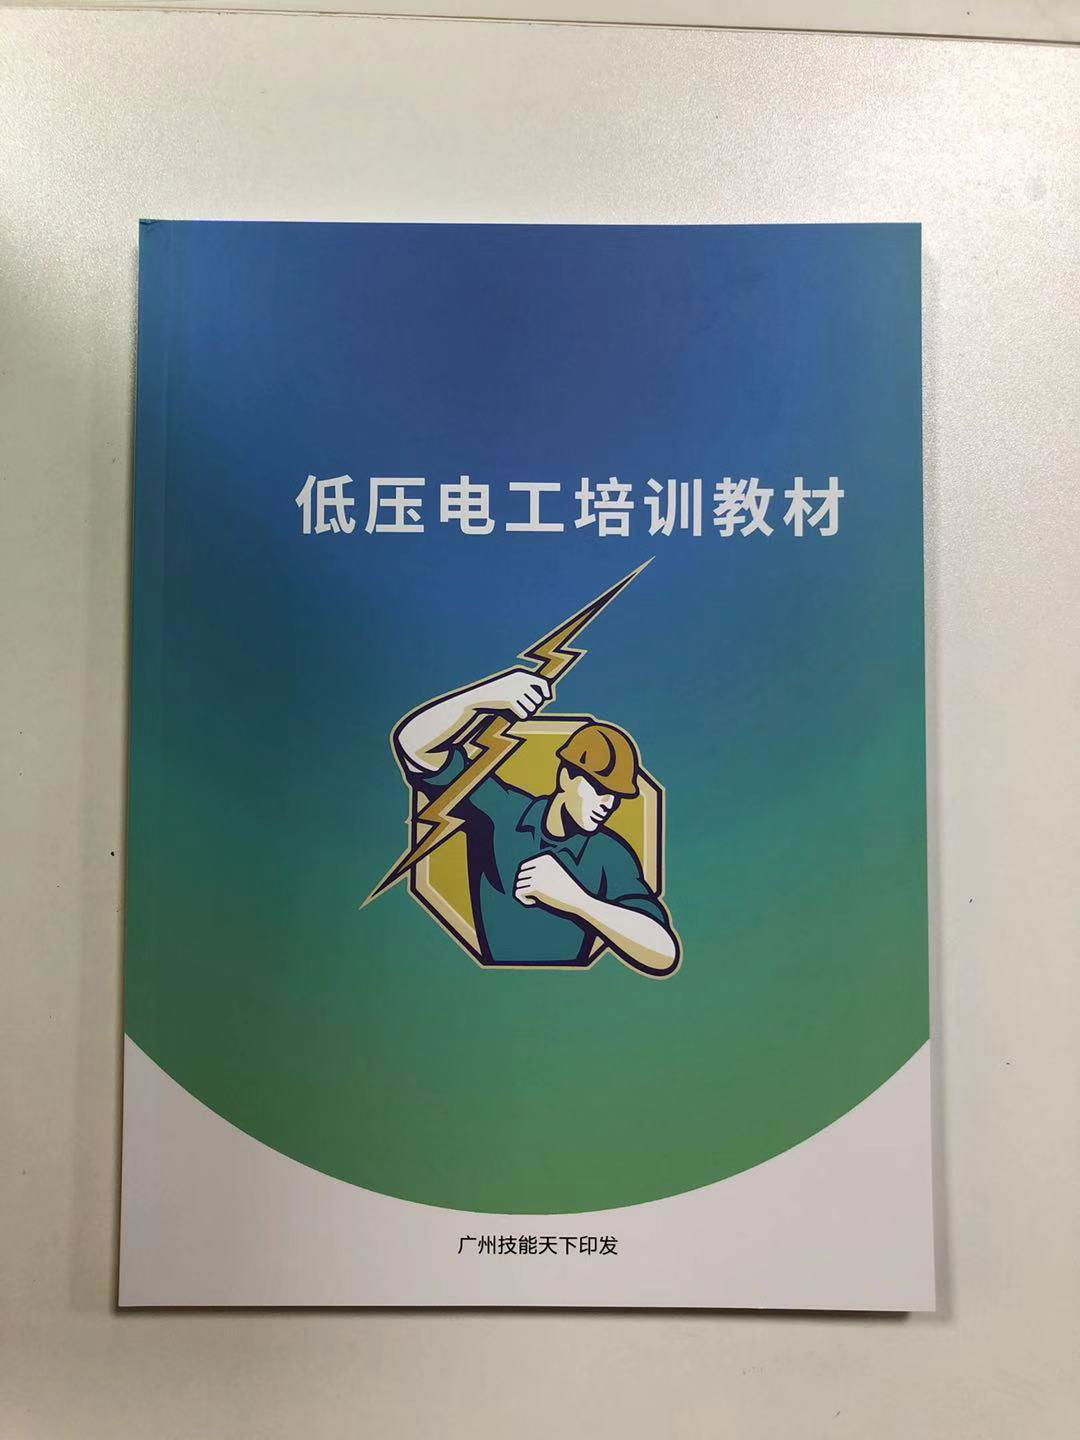 Guangzhou low-voltage electrician certification training materials